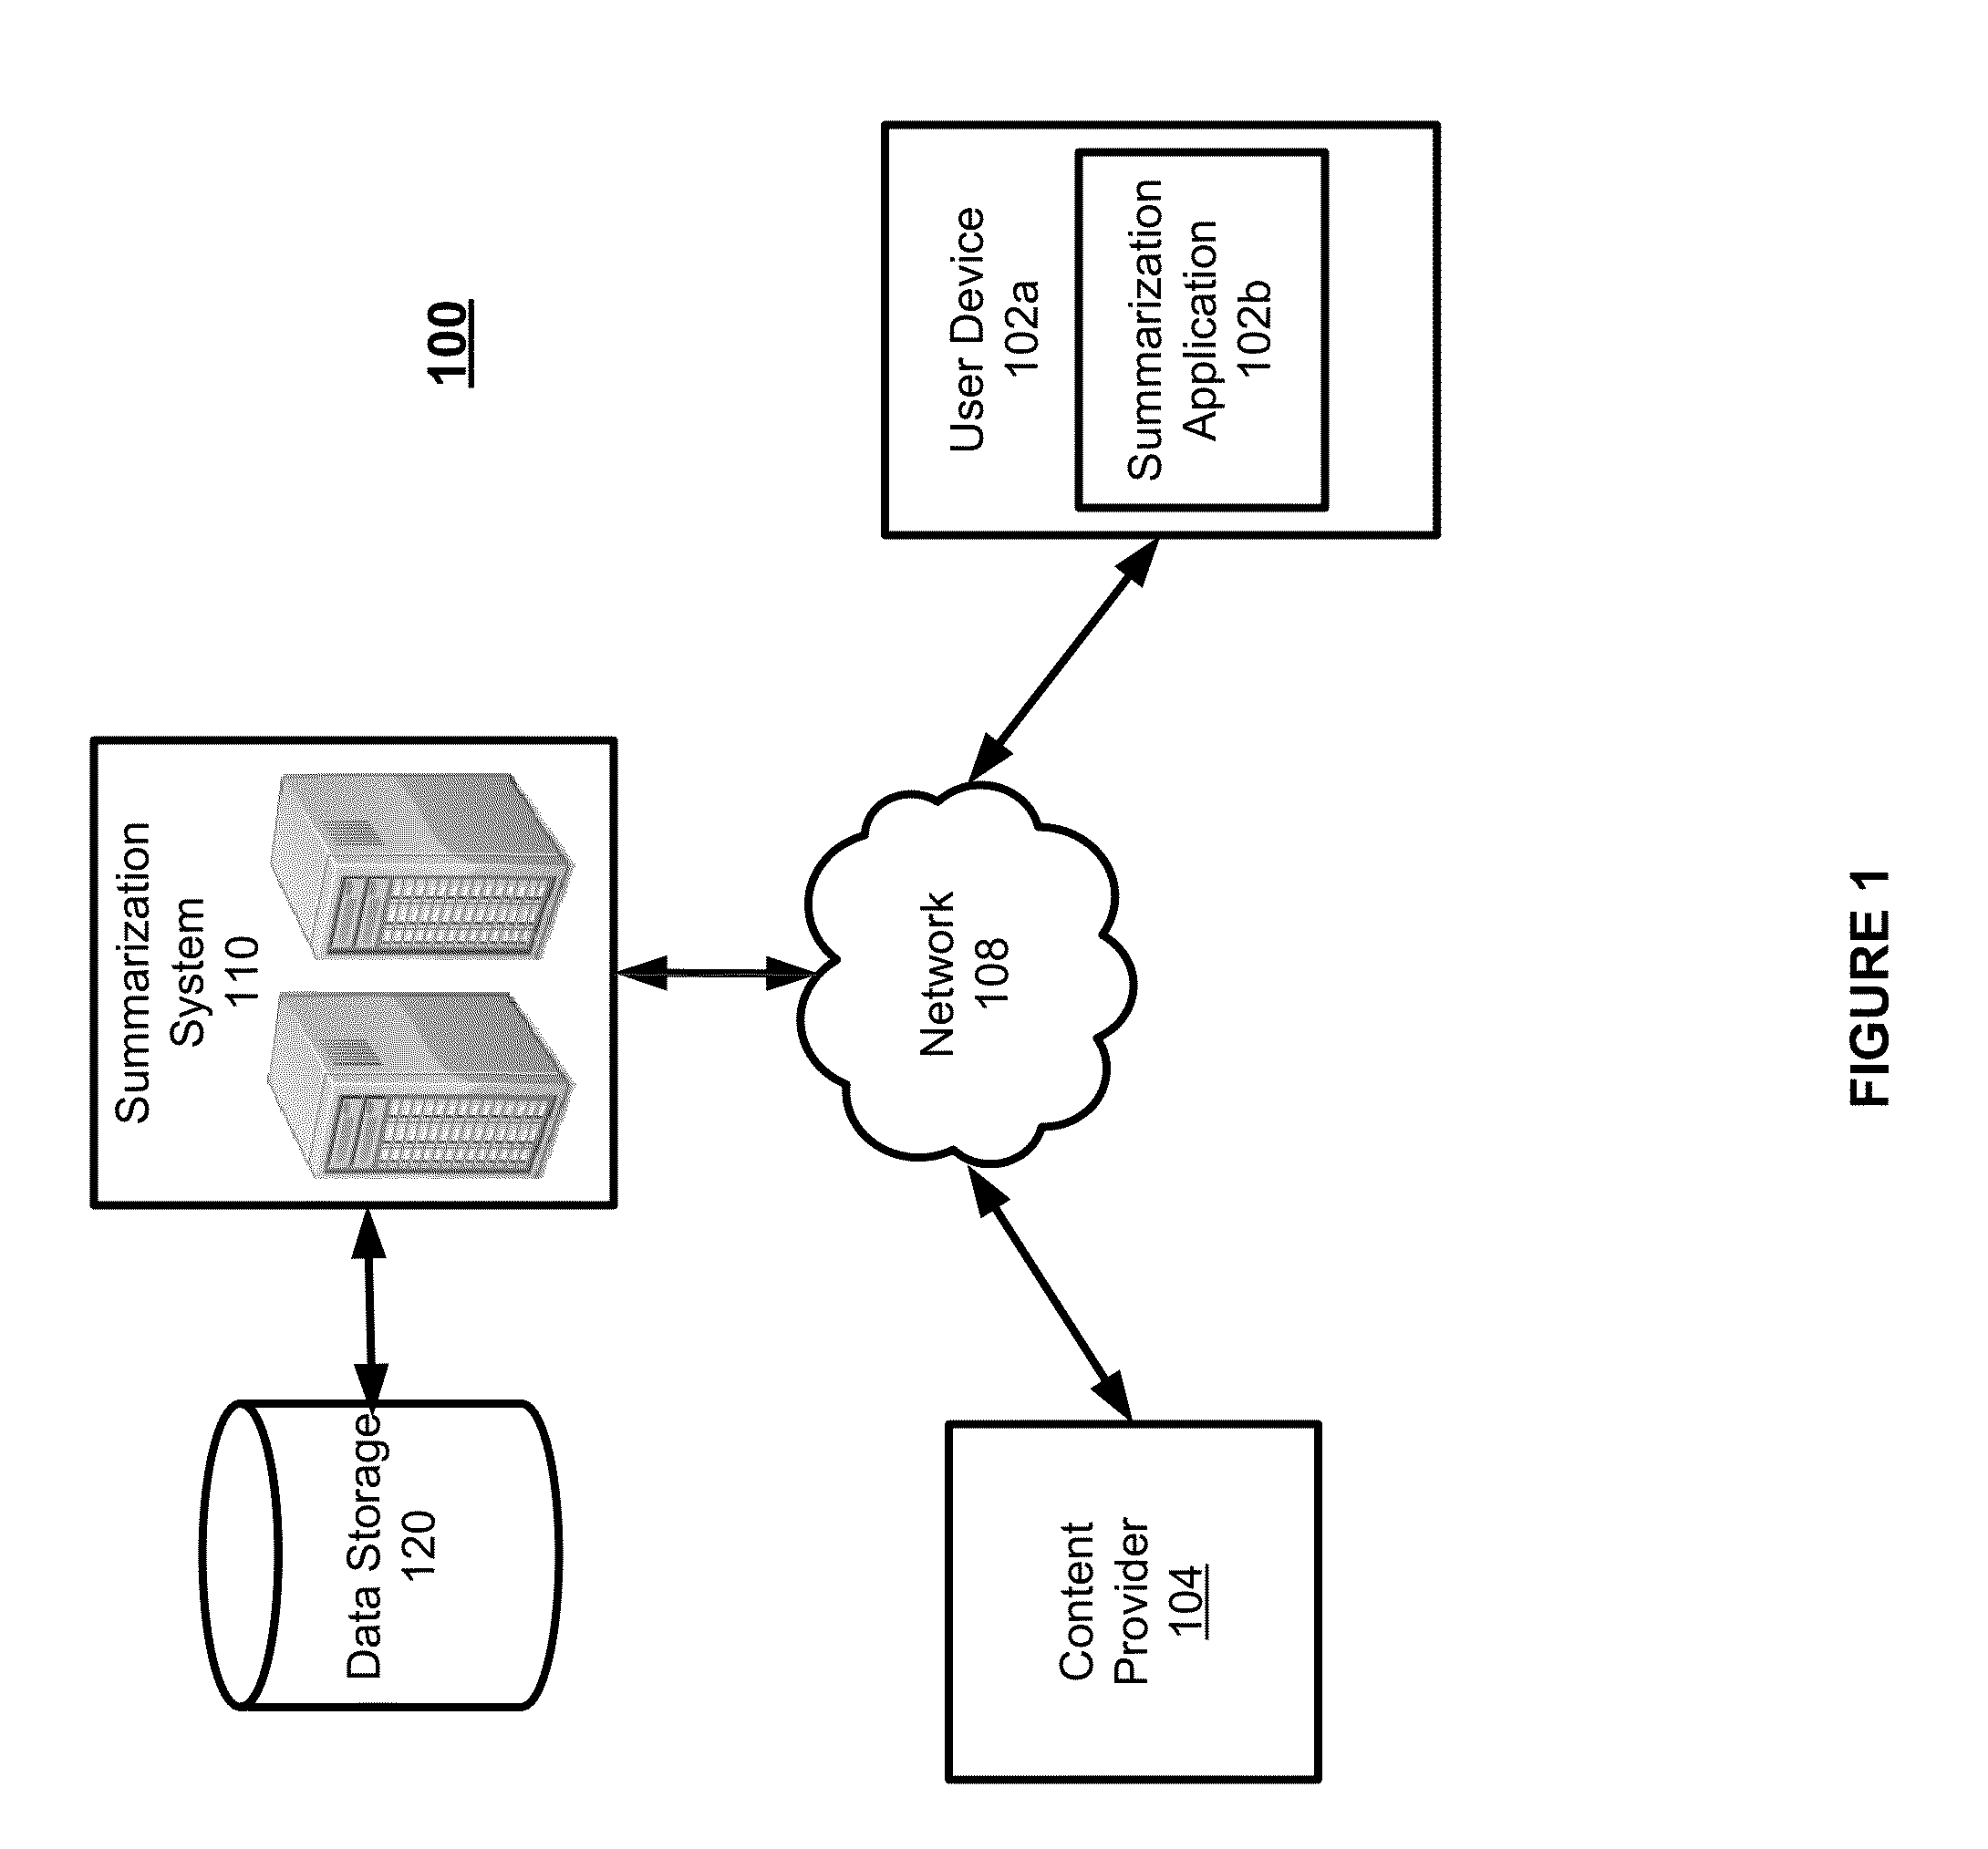 Systems and Methods for Generating Summaries of Documents